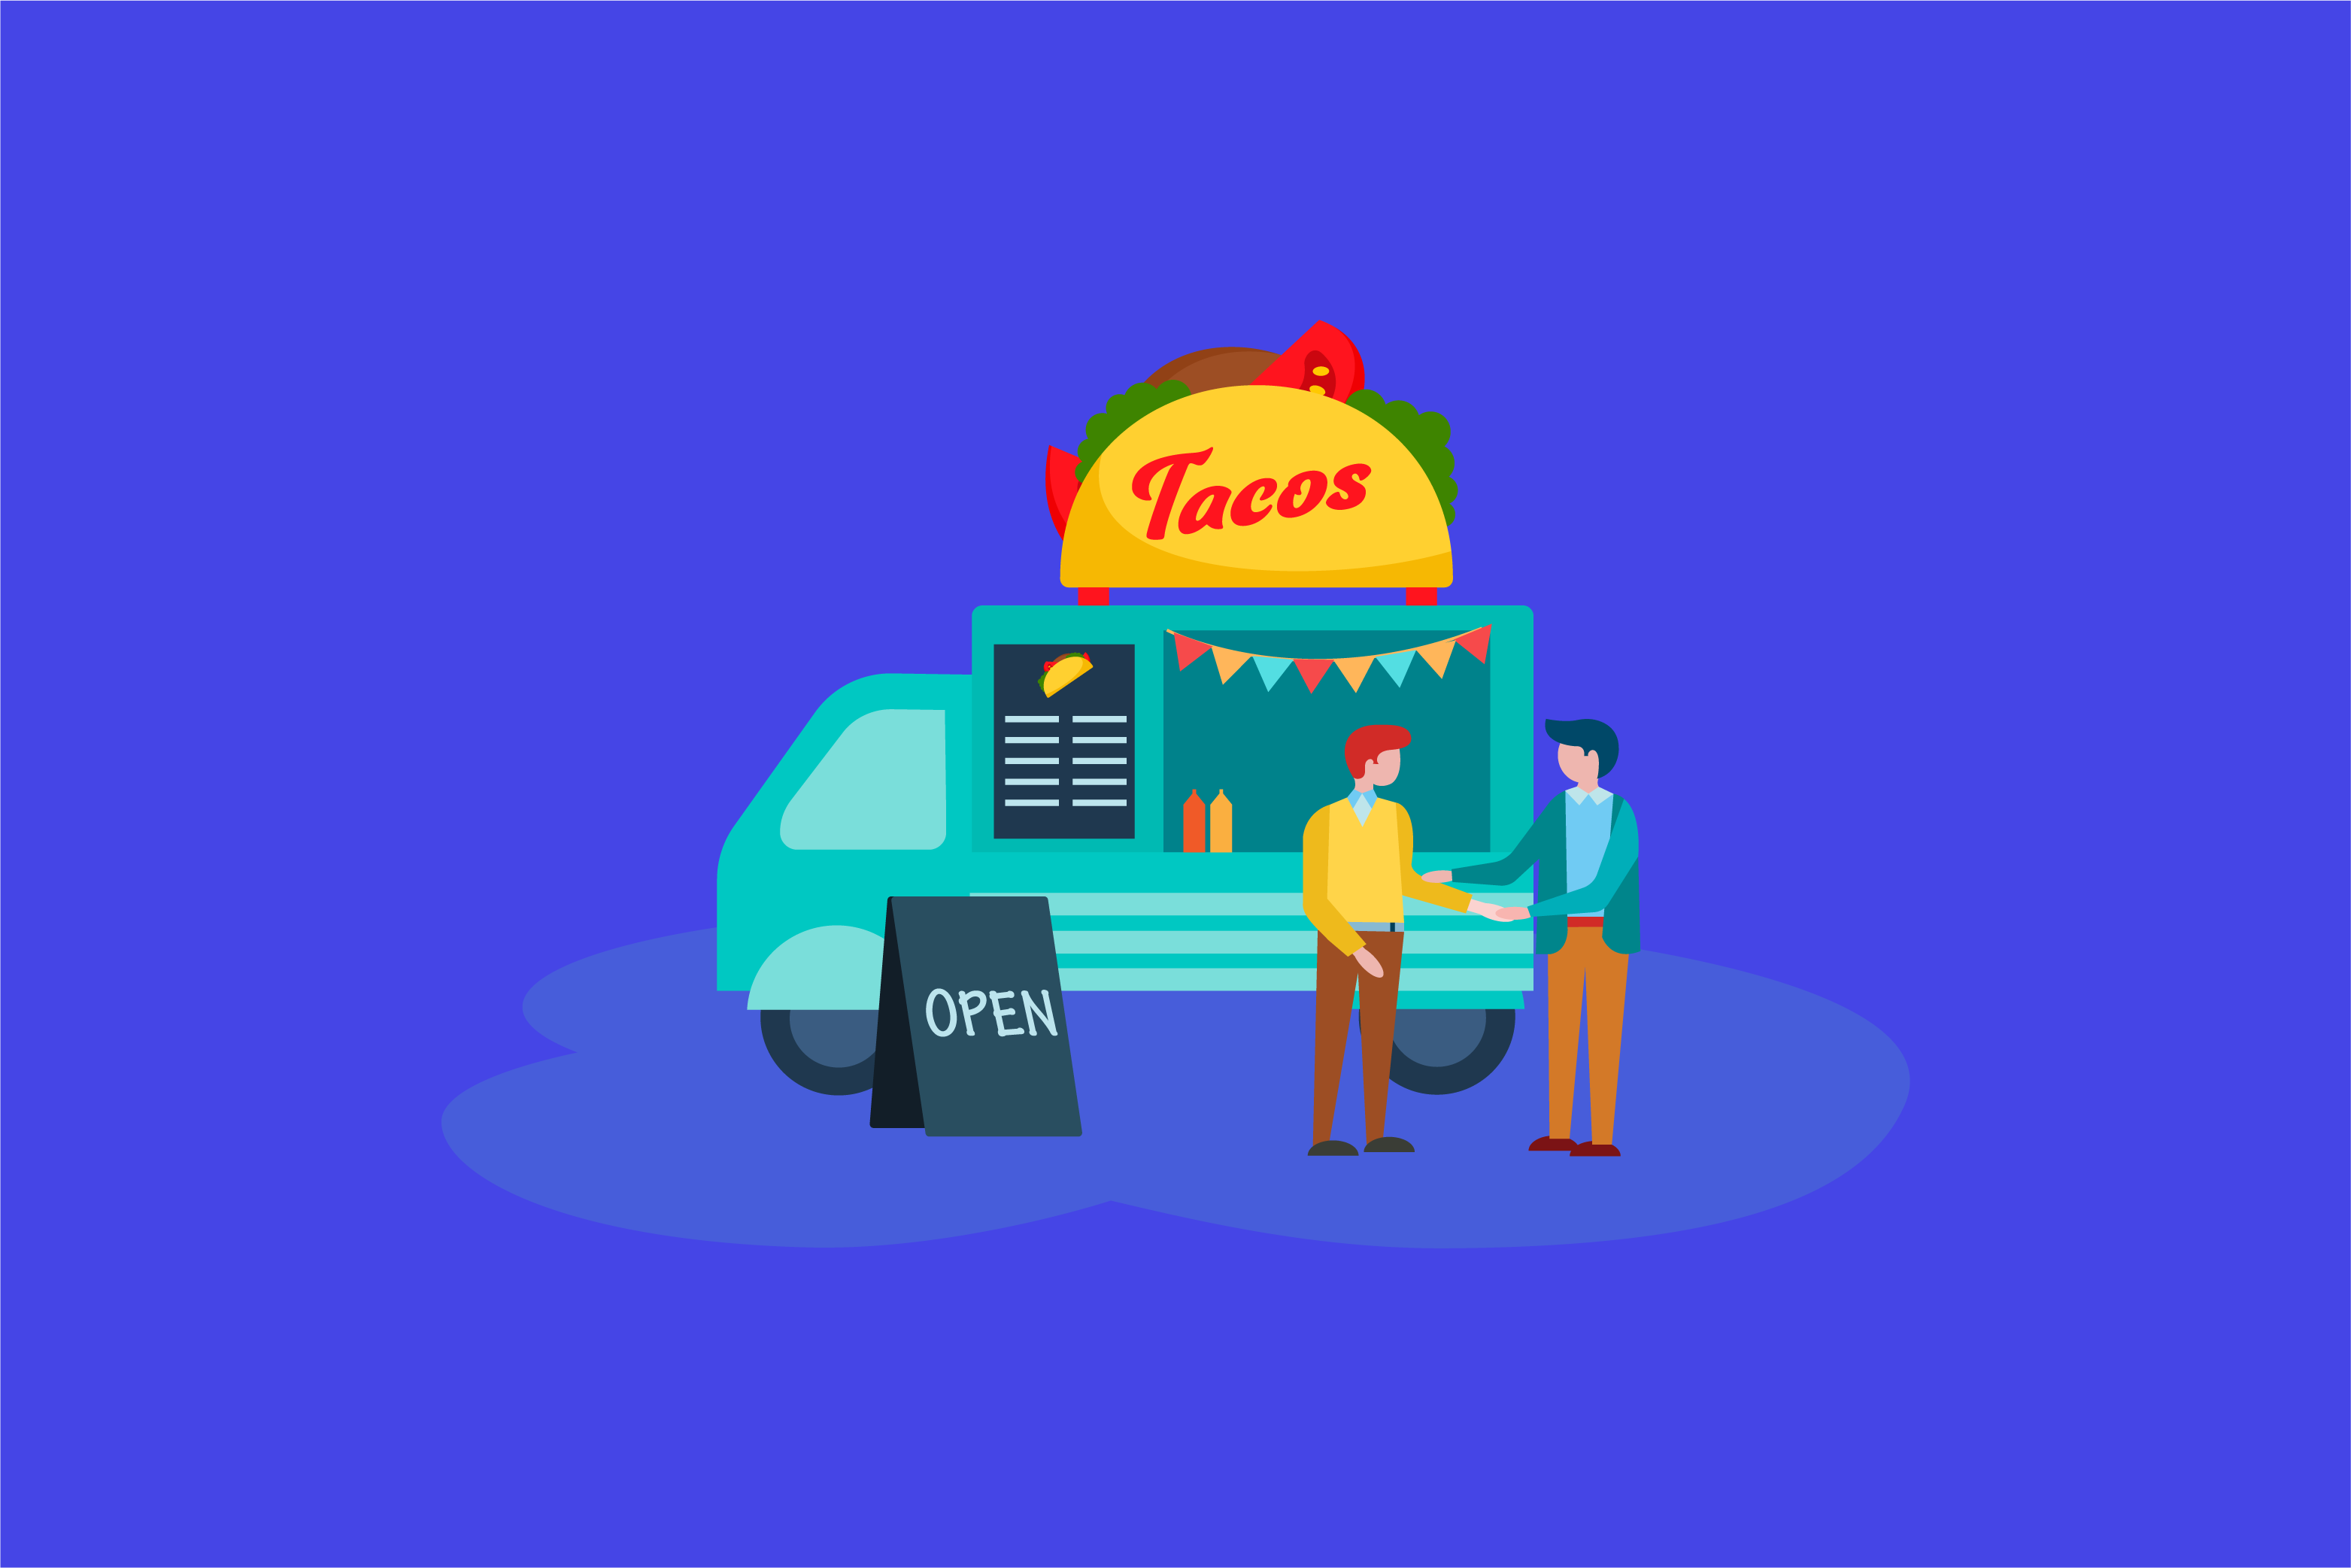 Investing Locally With a Self-Directed Account: How to Invest in a Taco Truck Small Business With Your Rocket Dollar IRA